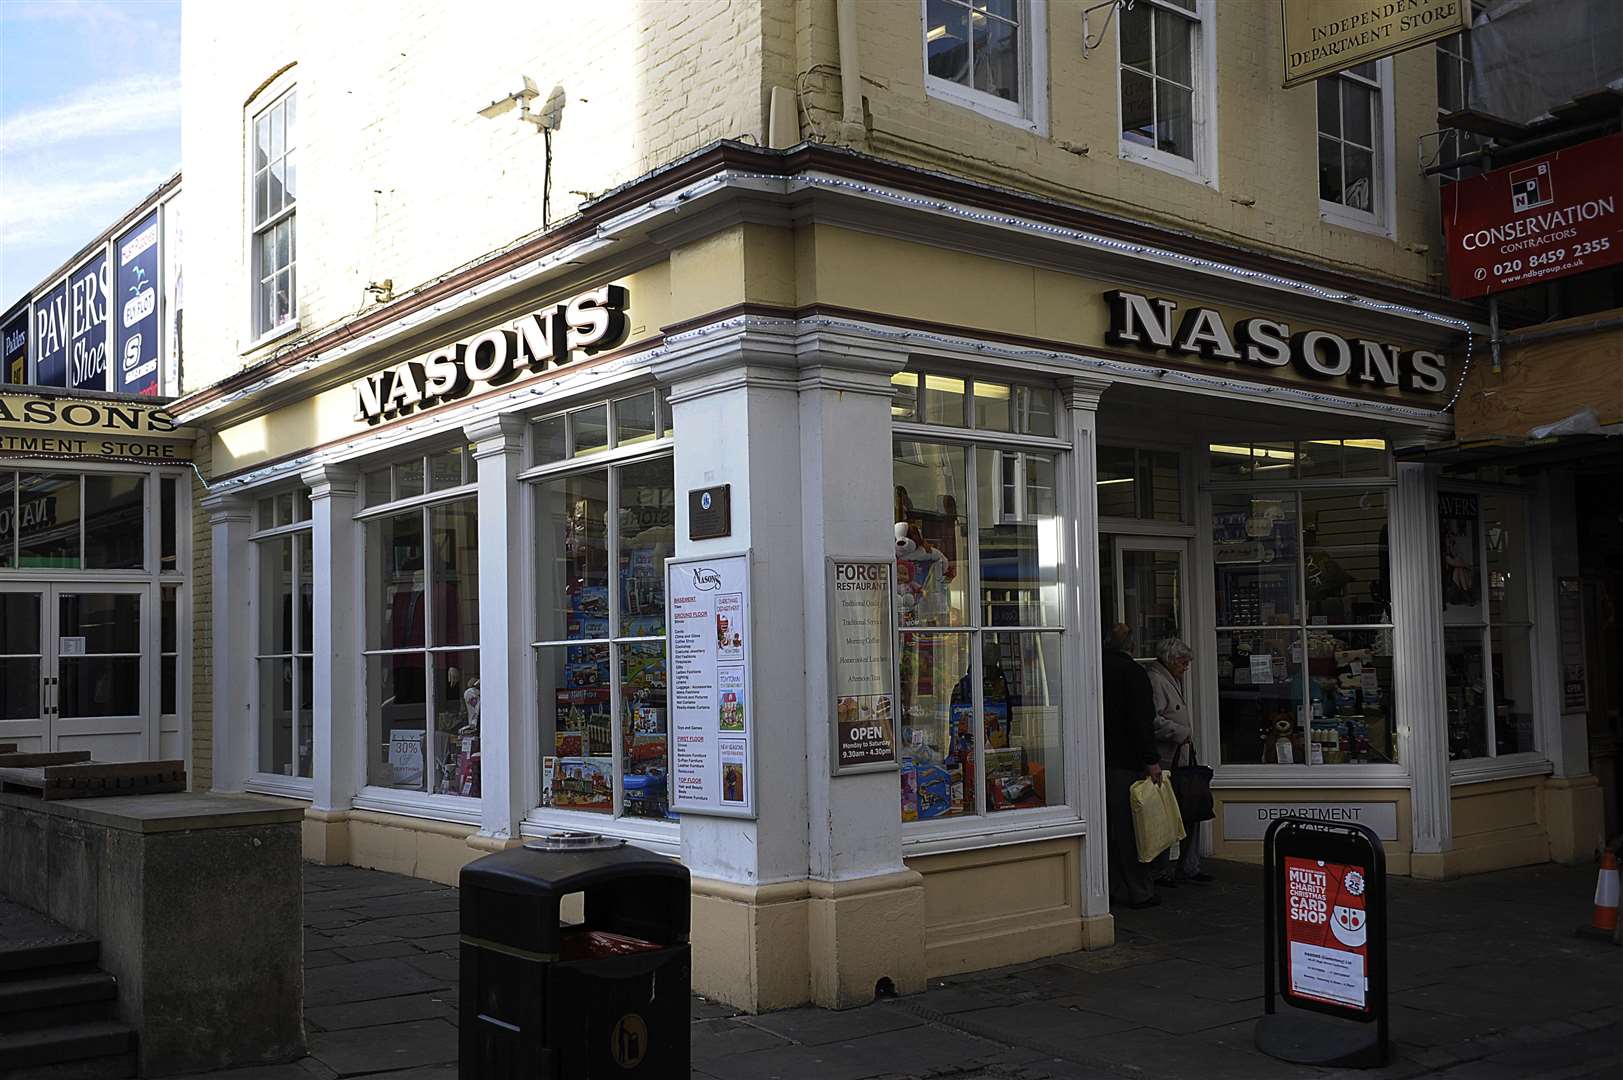 Nasons has been in the city centre for decades